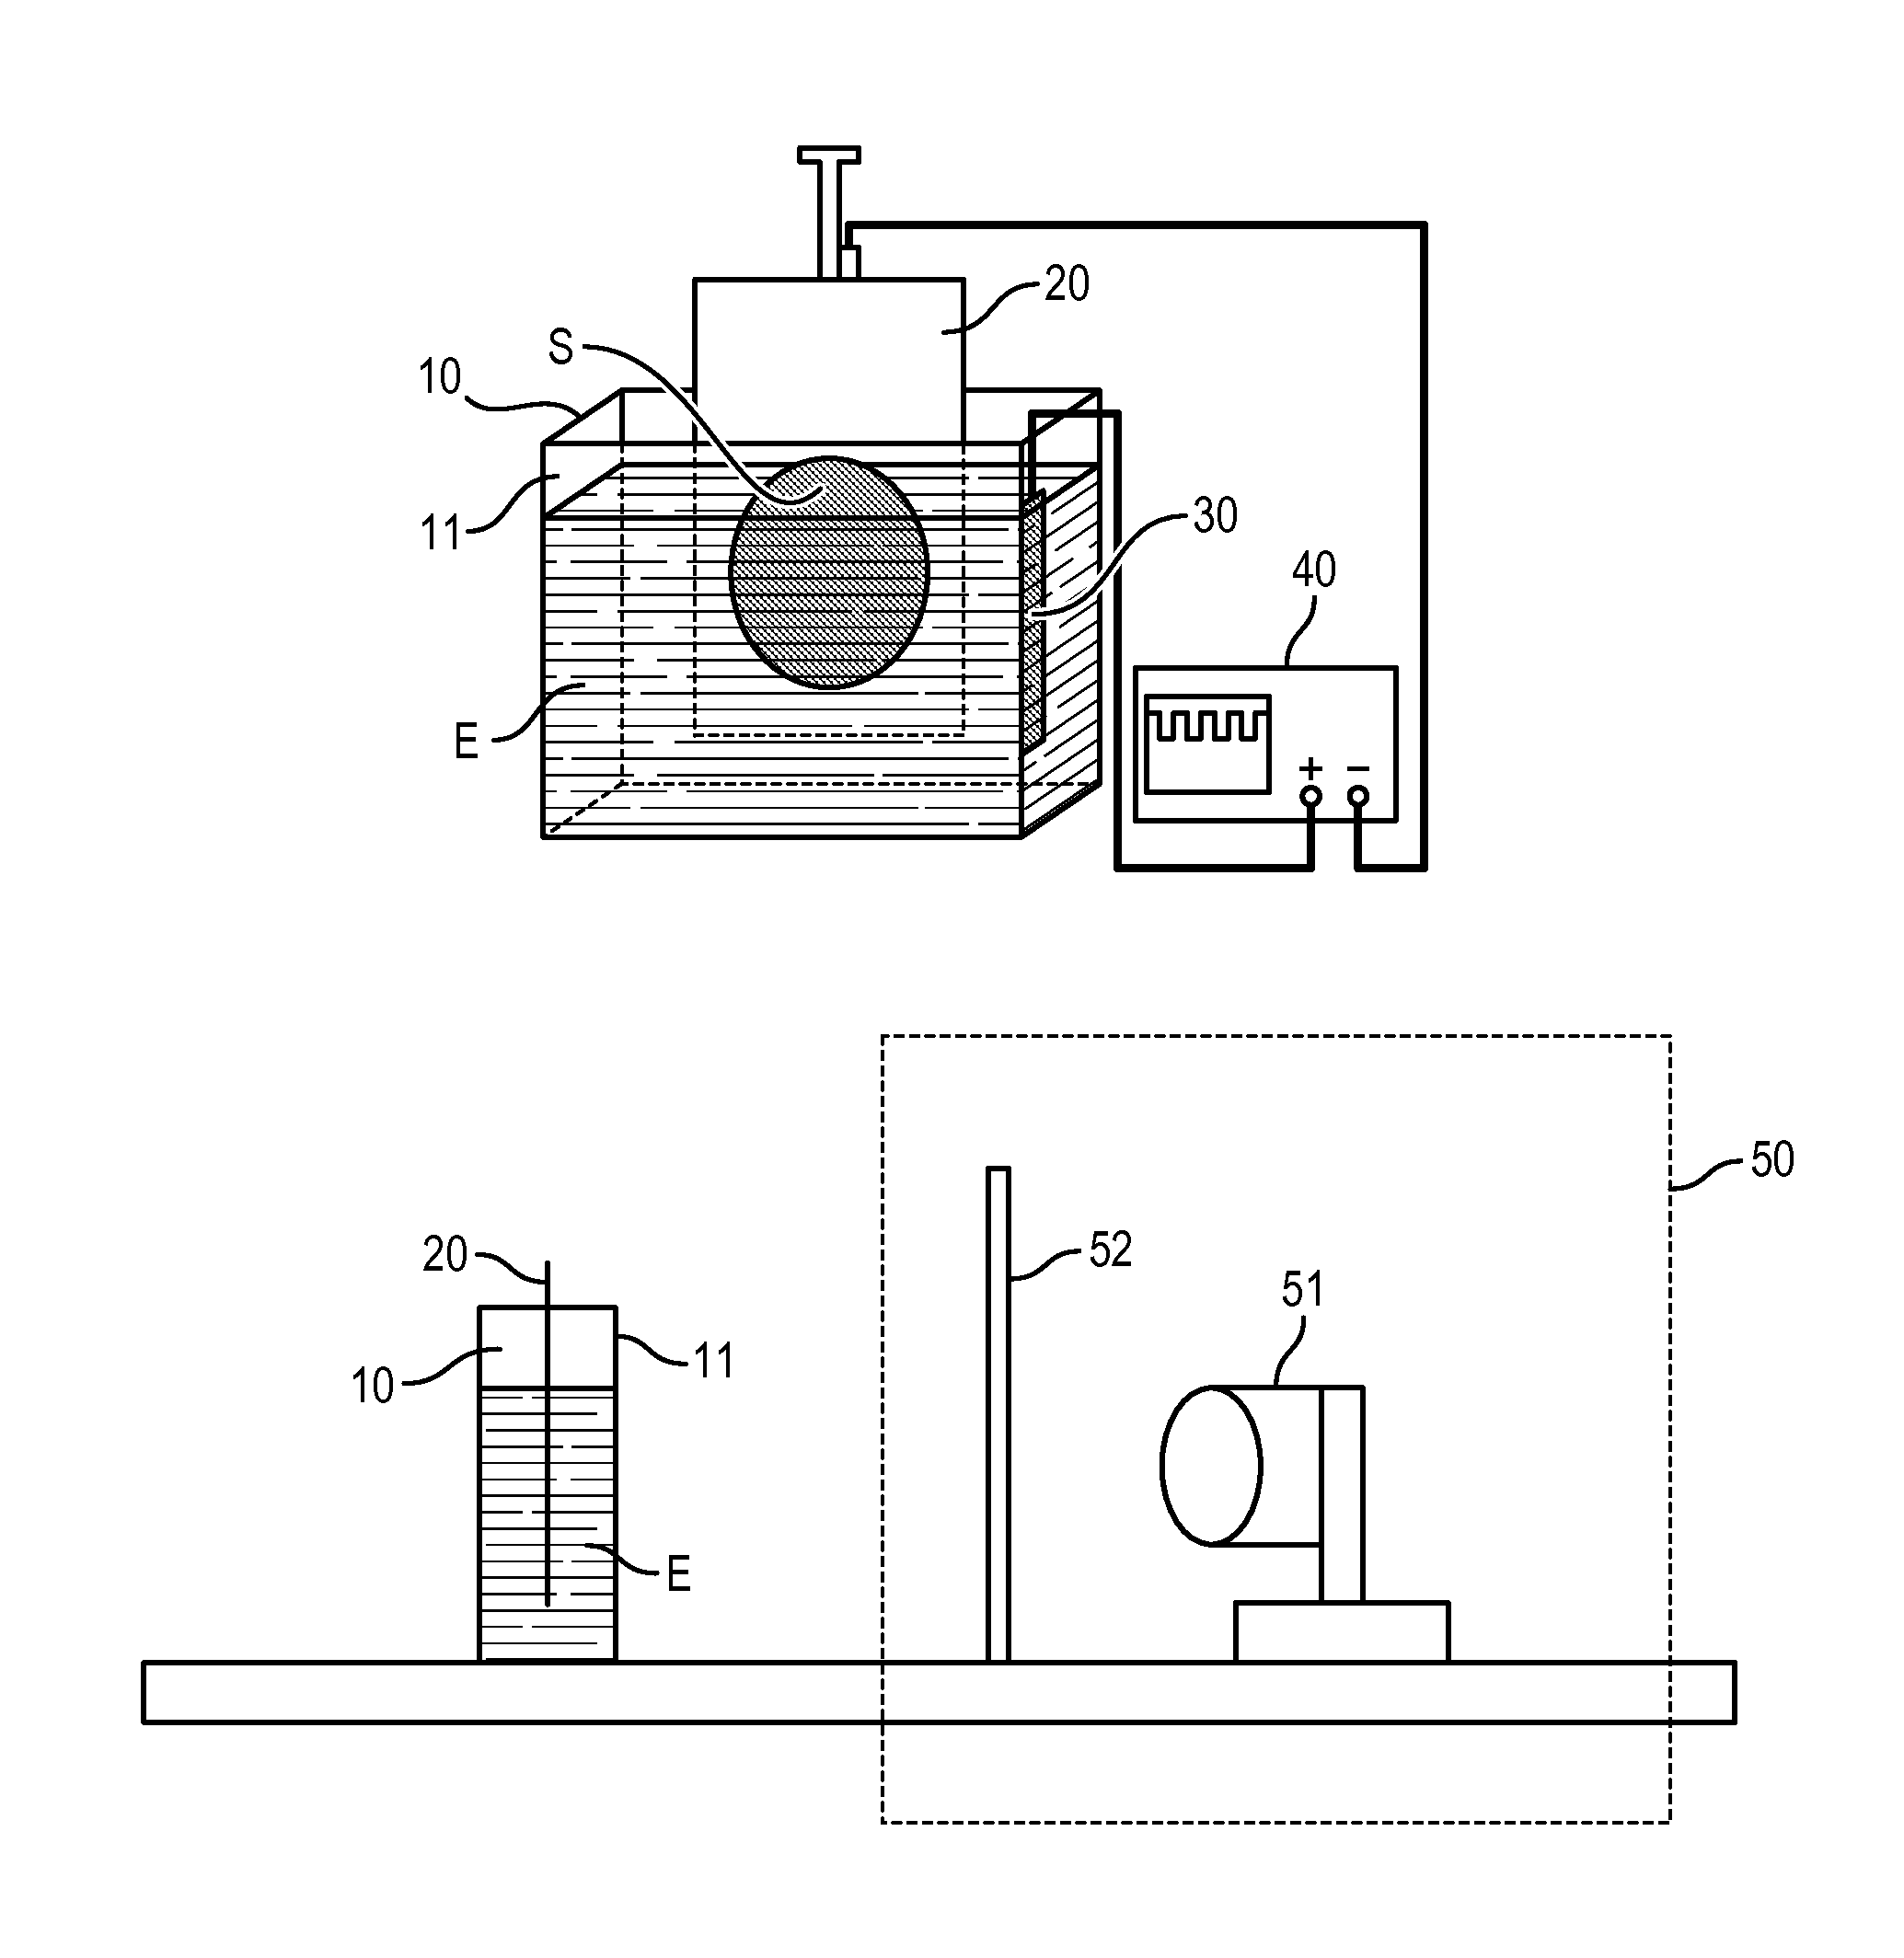 Device and method to conduct an electrochemical reaction on a surface of a semi-conductor substrate